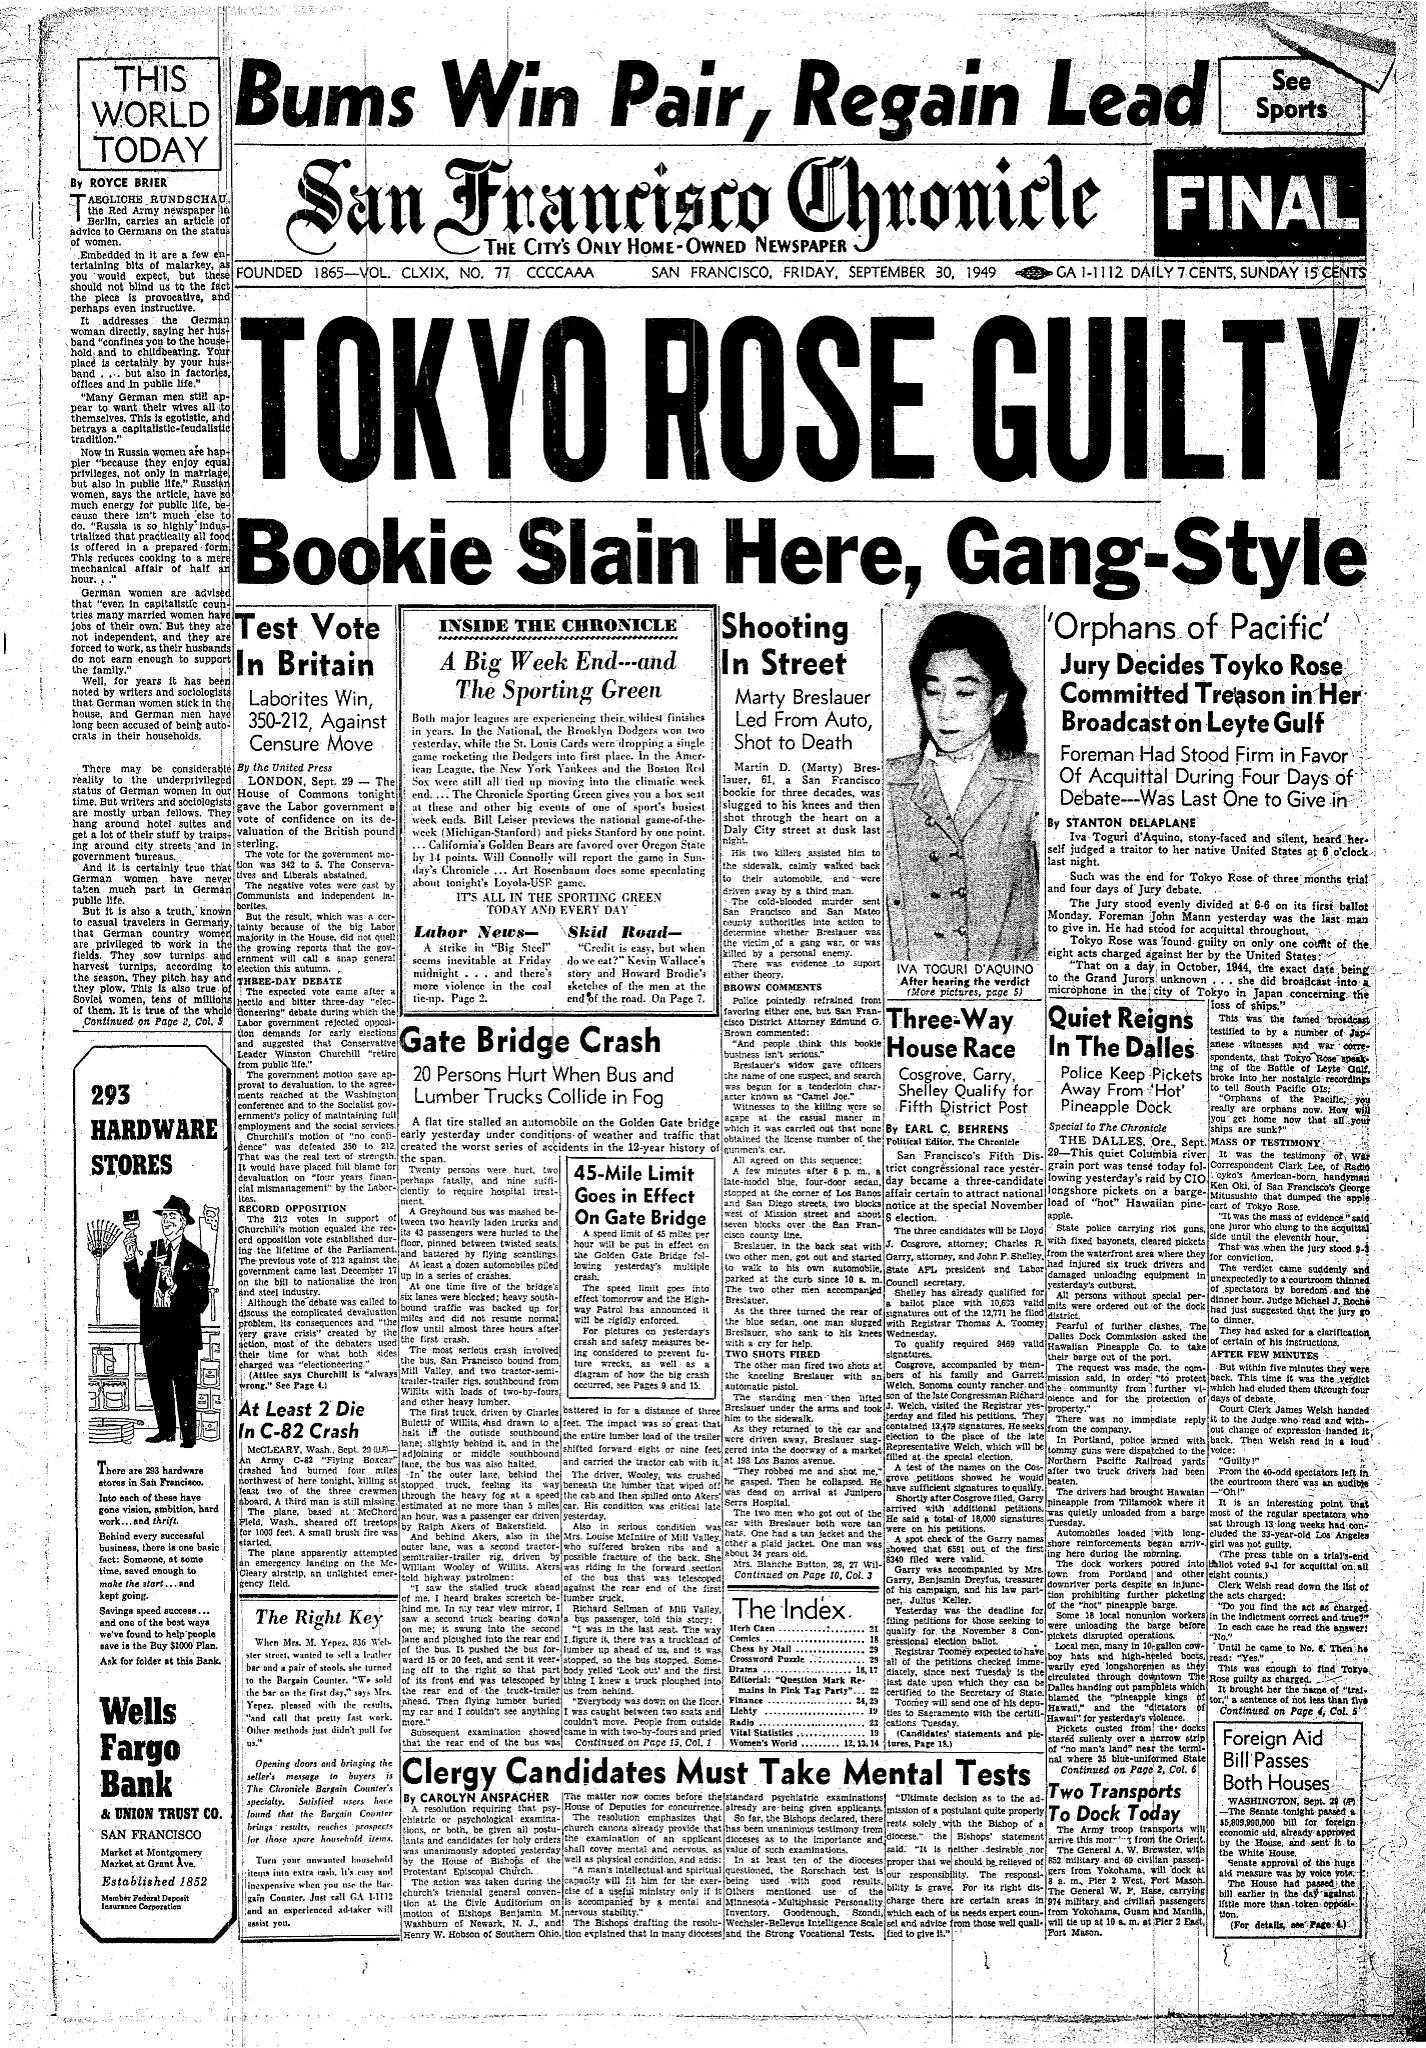 Chronicle Covers: When Tokyo Rose was found guilty - SFChronicle.com1426 x 2048